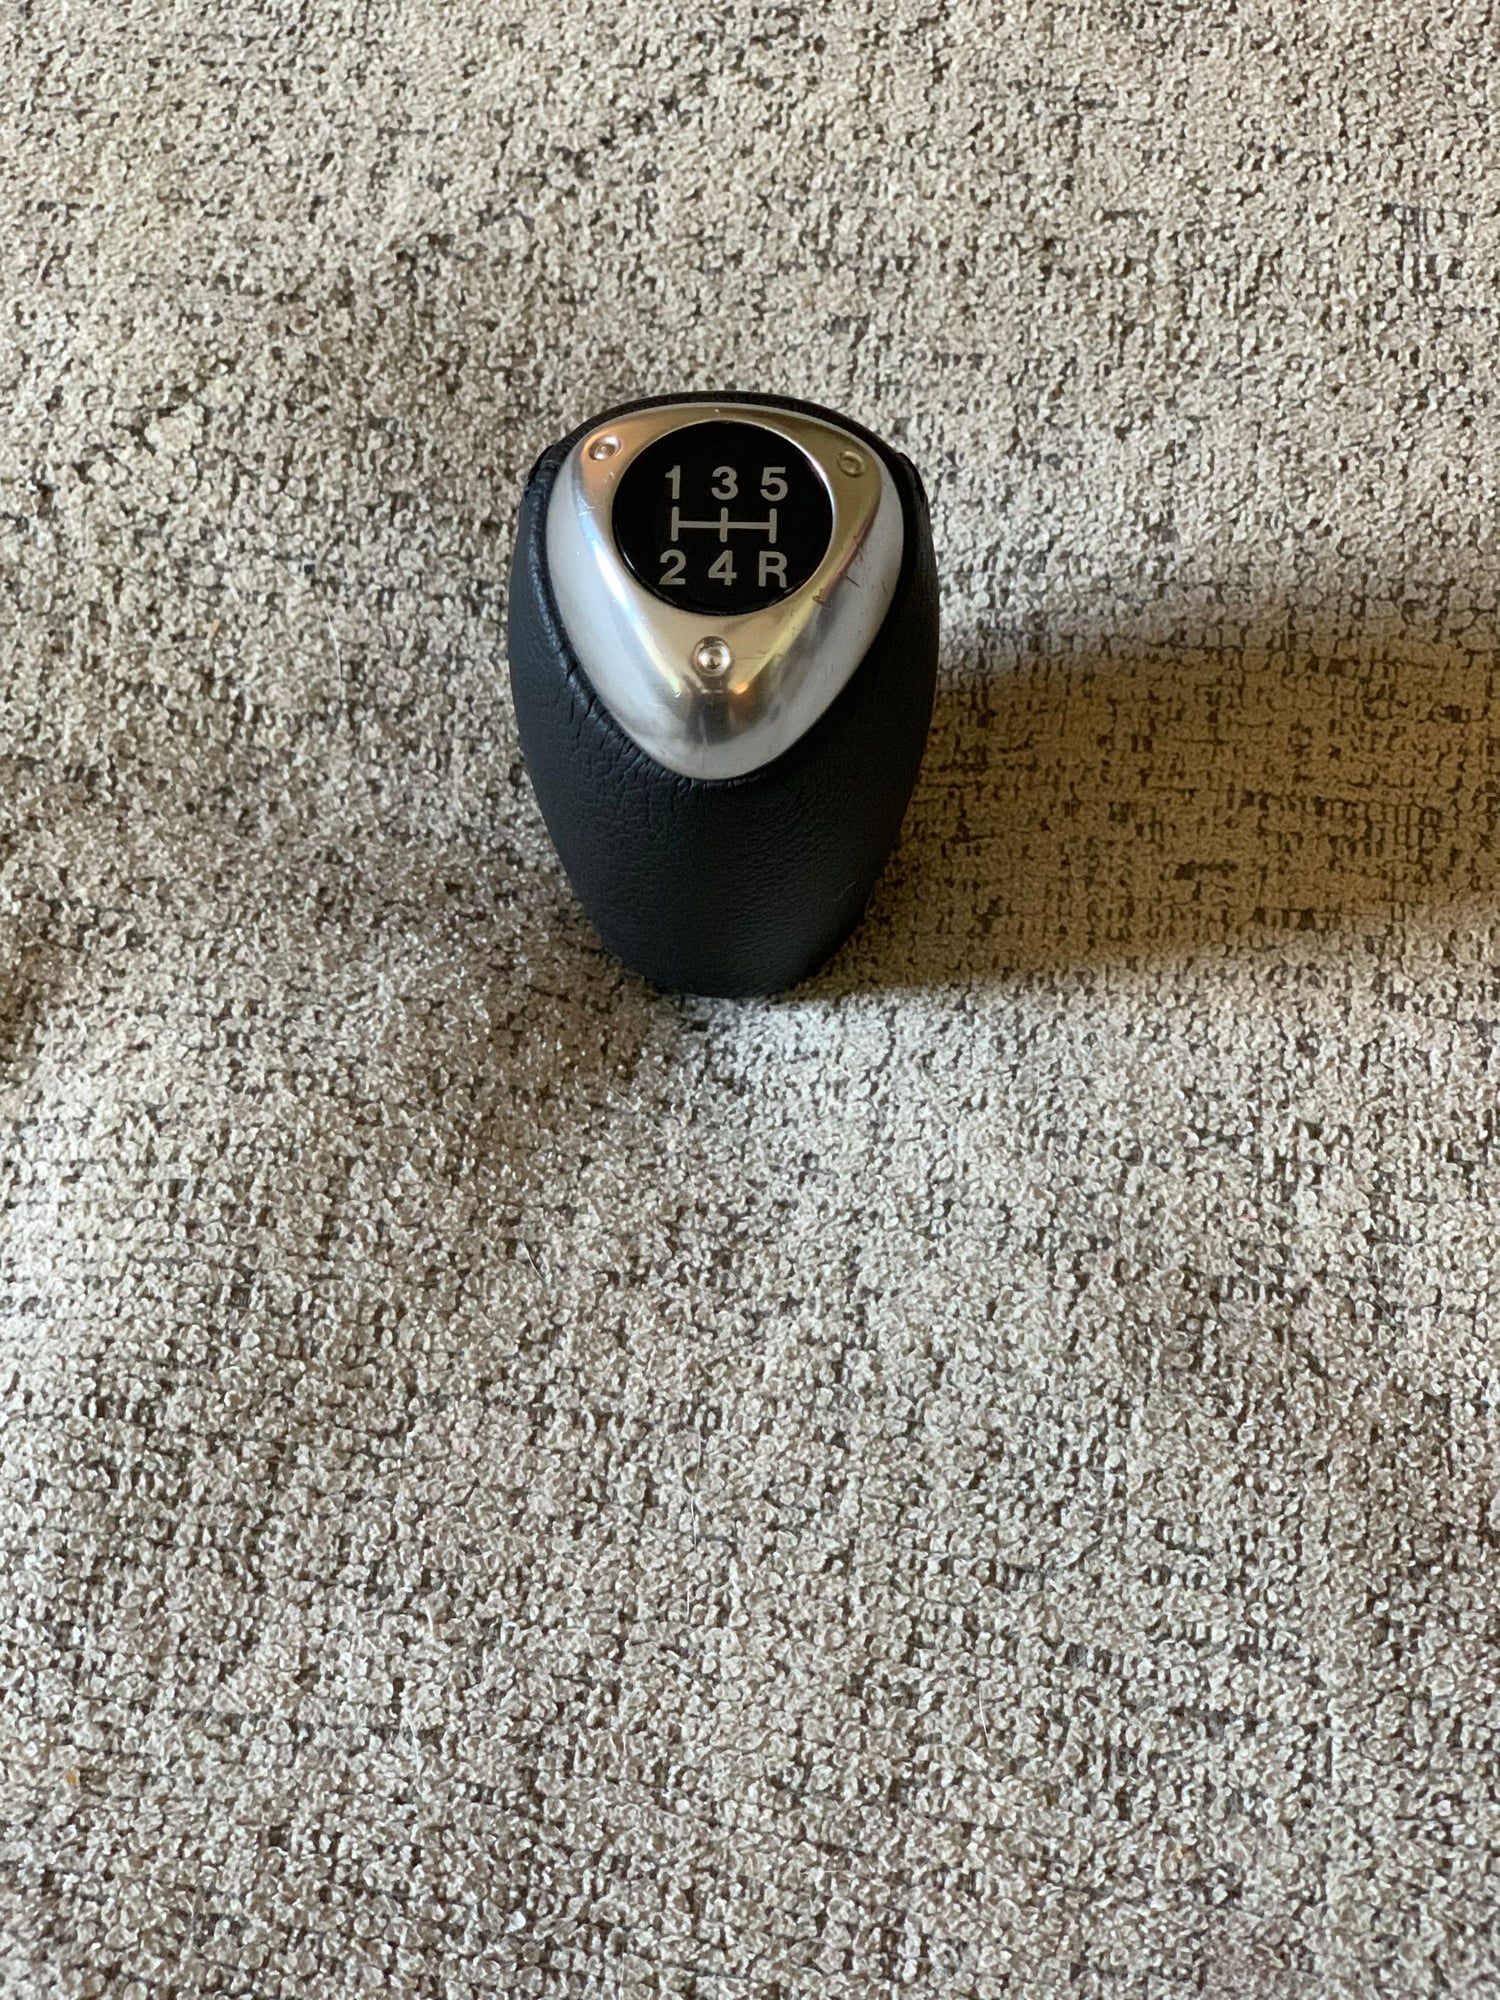 Interior/Upholstery - RX-8 5 Speed Shift Knob - Used - 1993 to 2002 Mazda RX-7 - Portland, OR 97035, United States